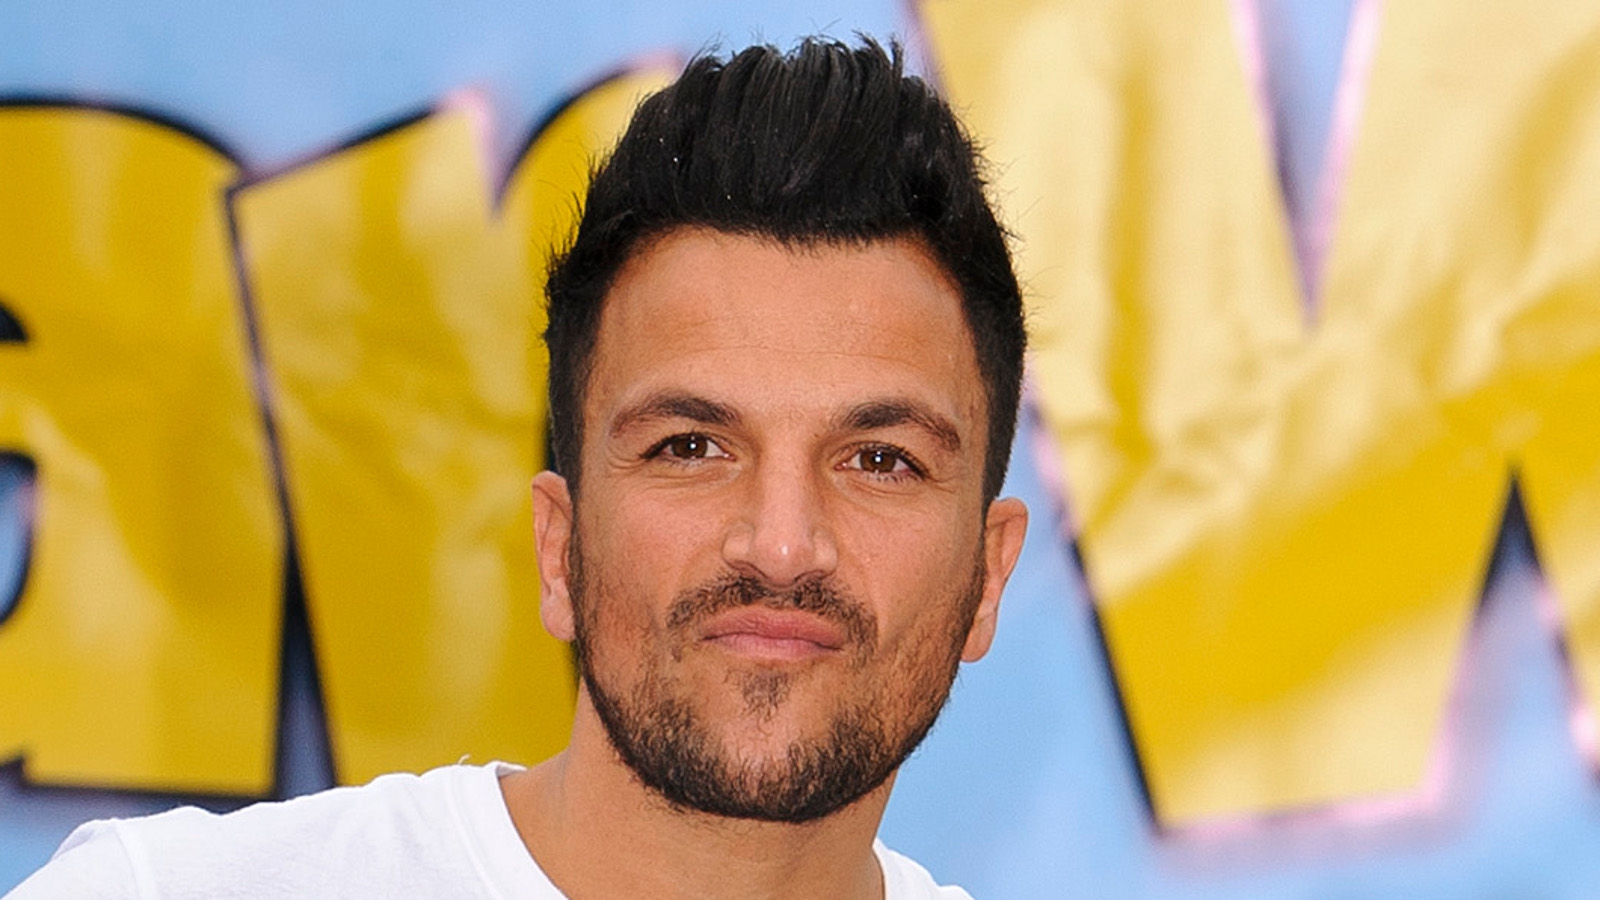 Peter Andre pens track for Dreamworks movie